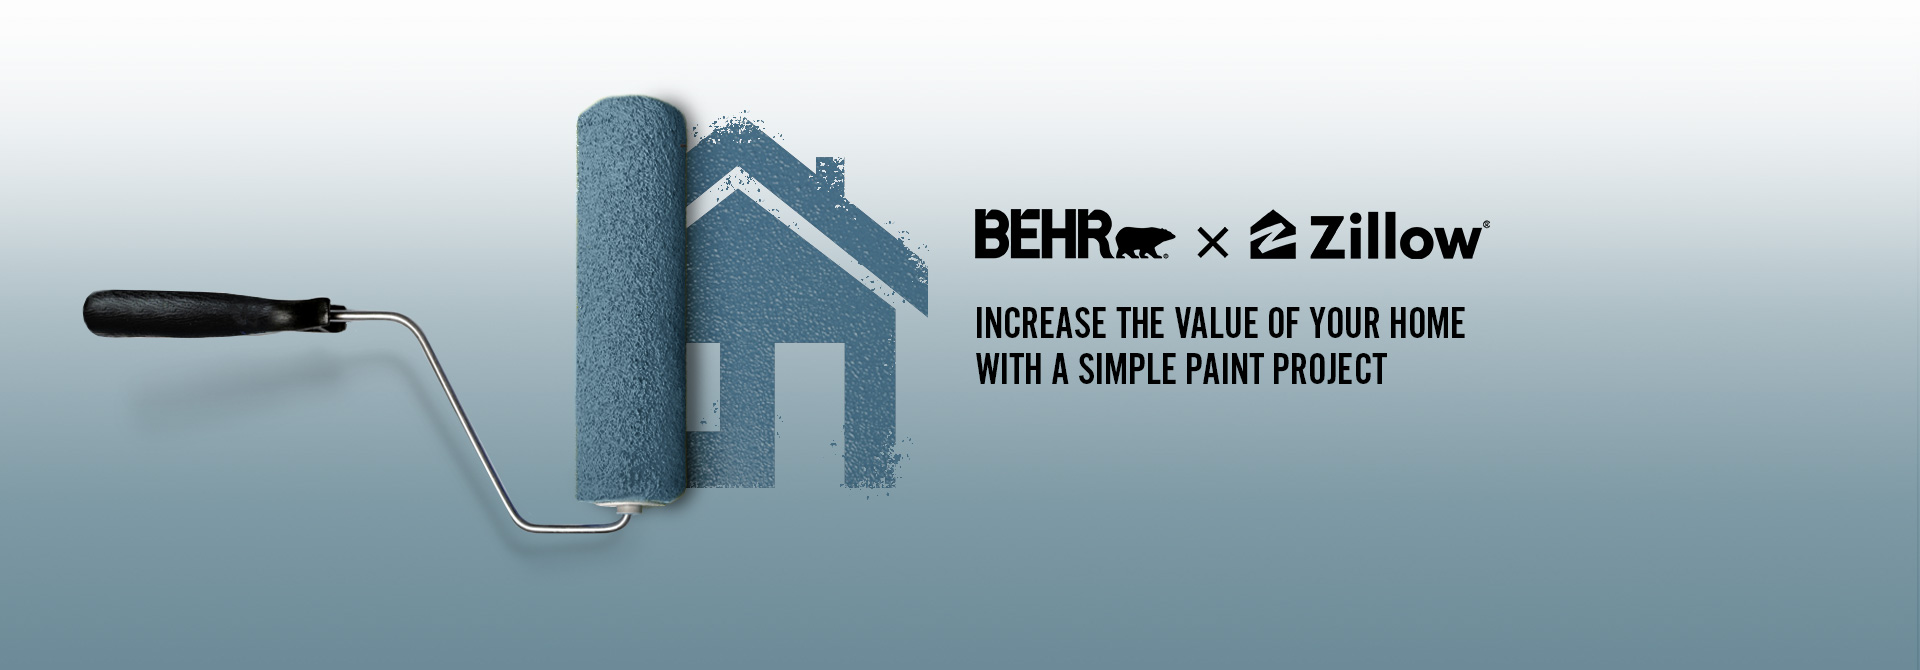 A paint roller painting a blue house graphic in the background and the Behr and Zillow logos with the words Increase the Value of Your Home with a Simple Paint Project in the foreground.